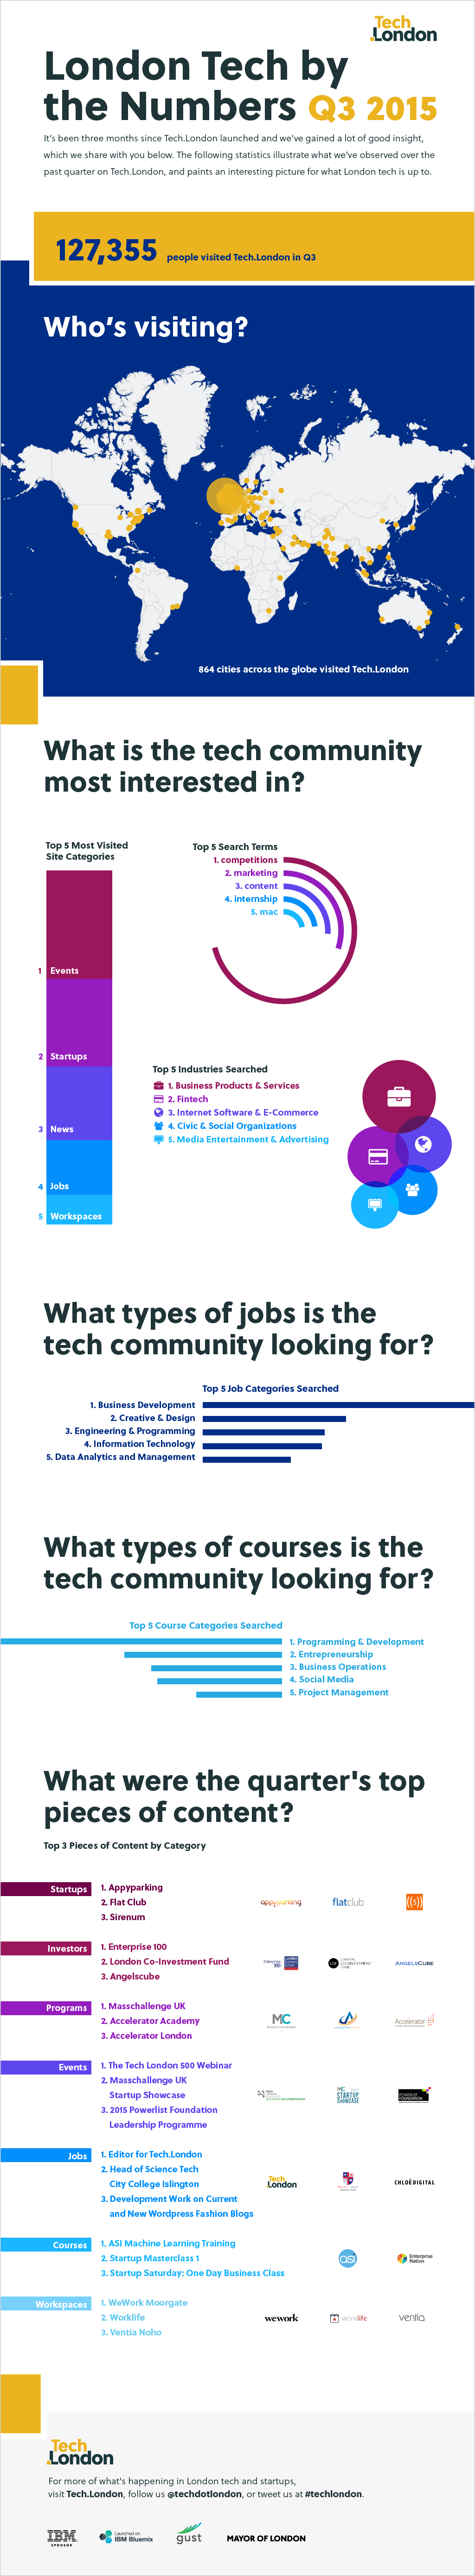 London Tech By The Numbers Q3 2015